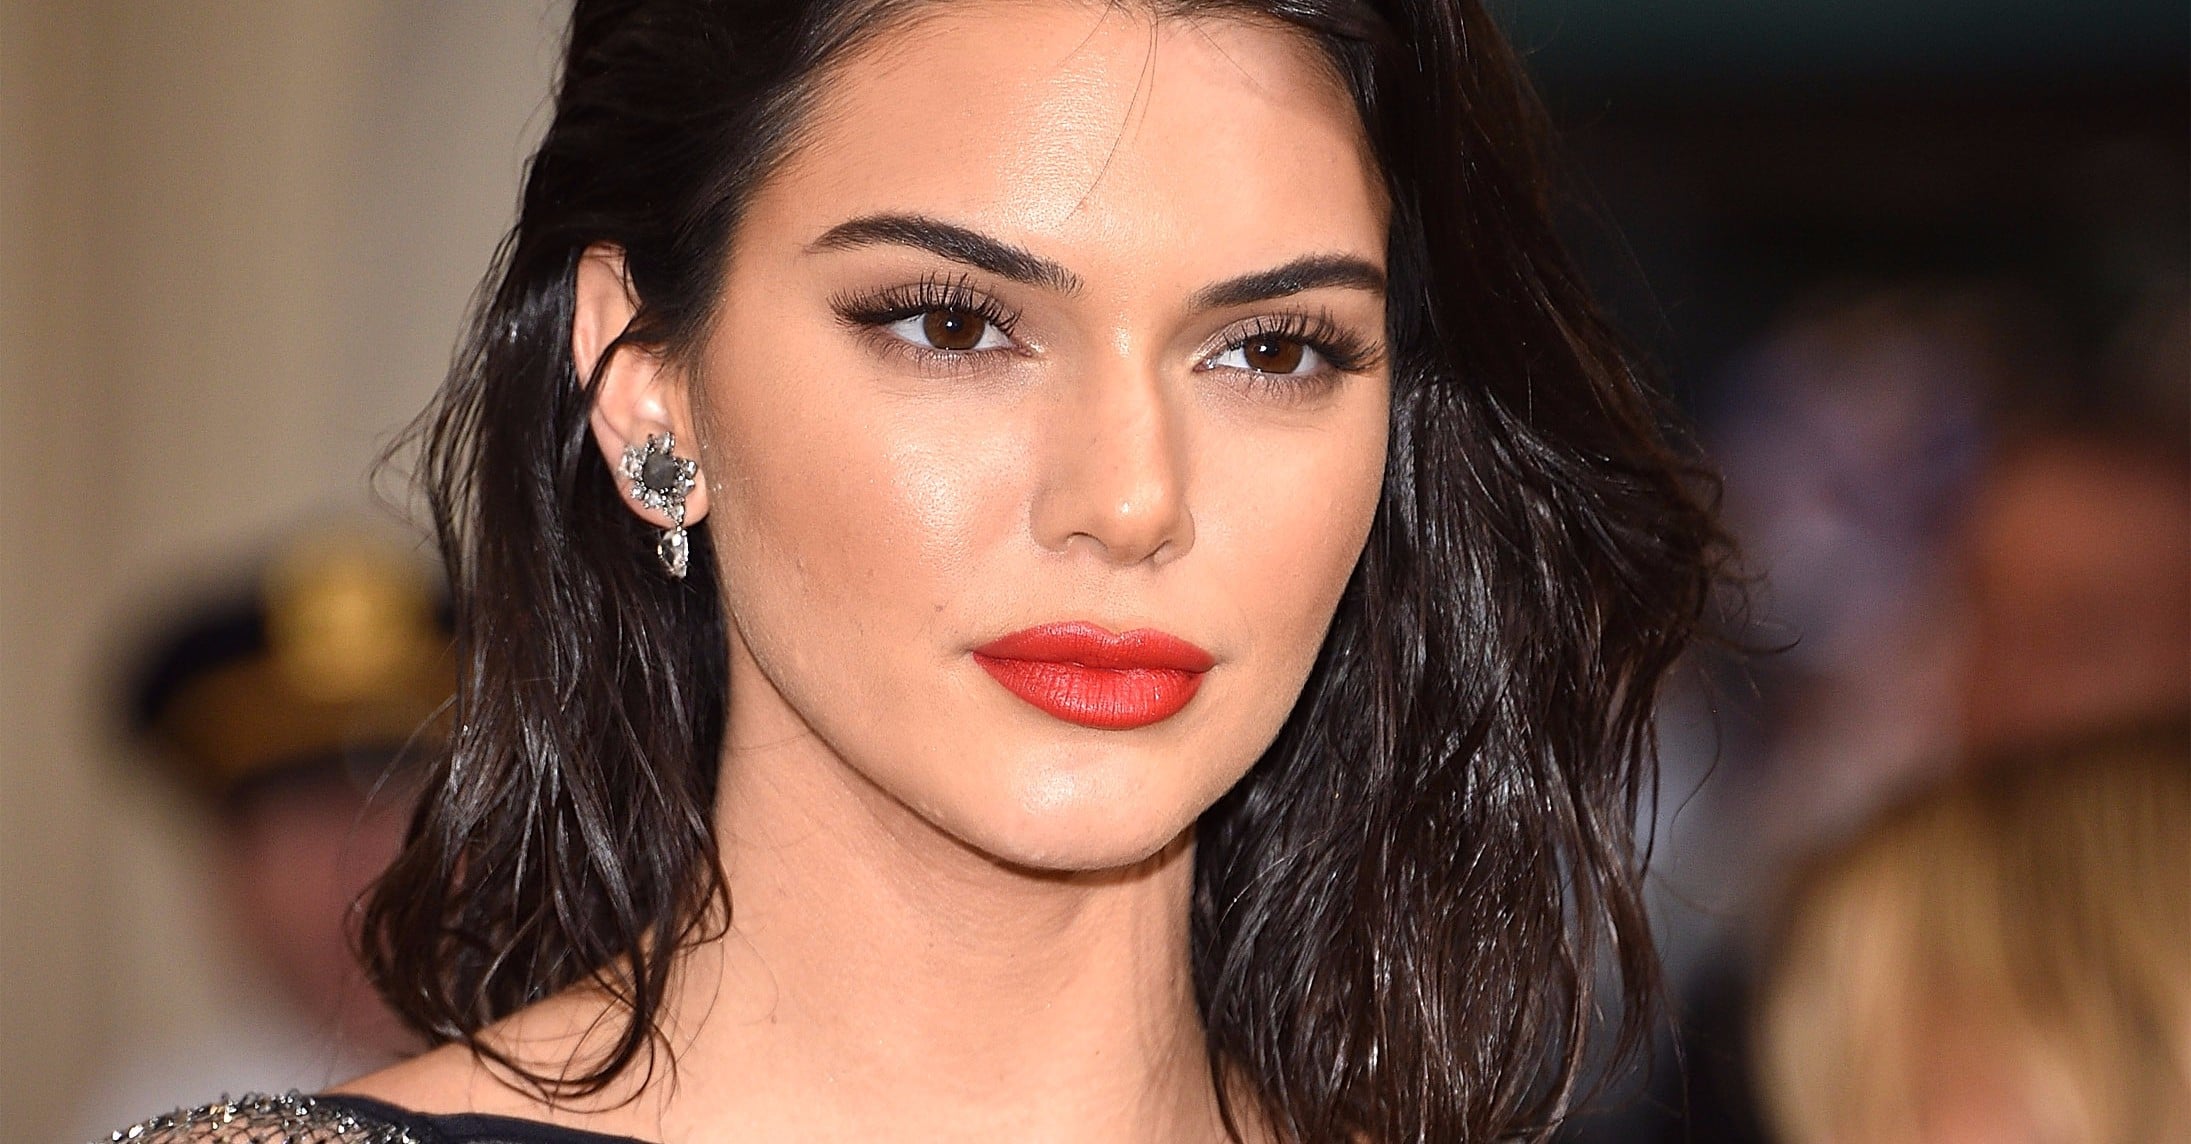 Kendall Jenner's Makeup and Lipstick at the Met Gala 2017 | POPSUGAR Beauty